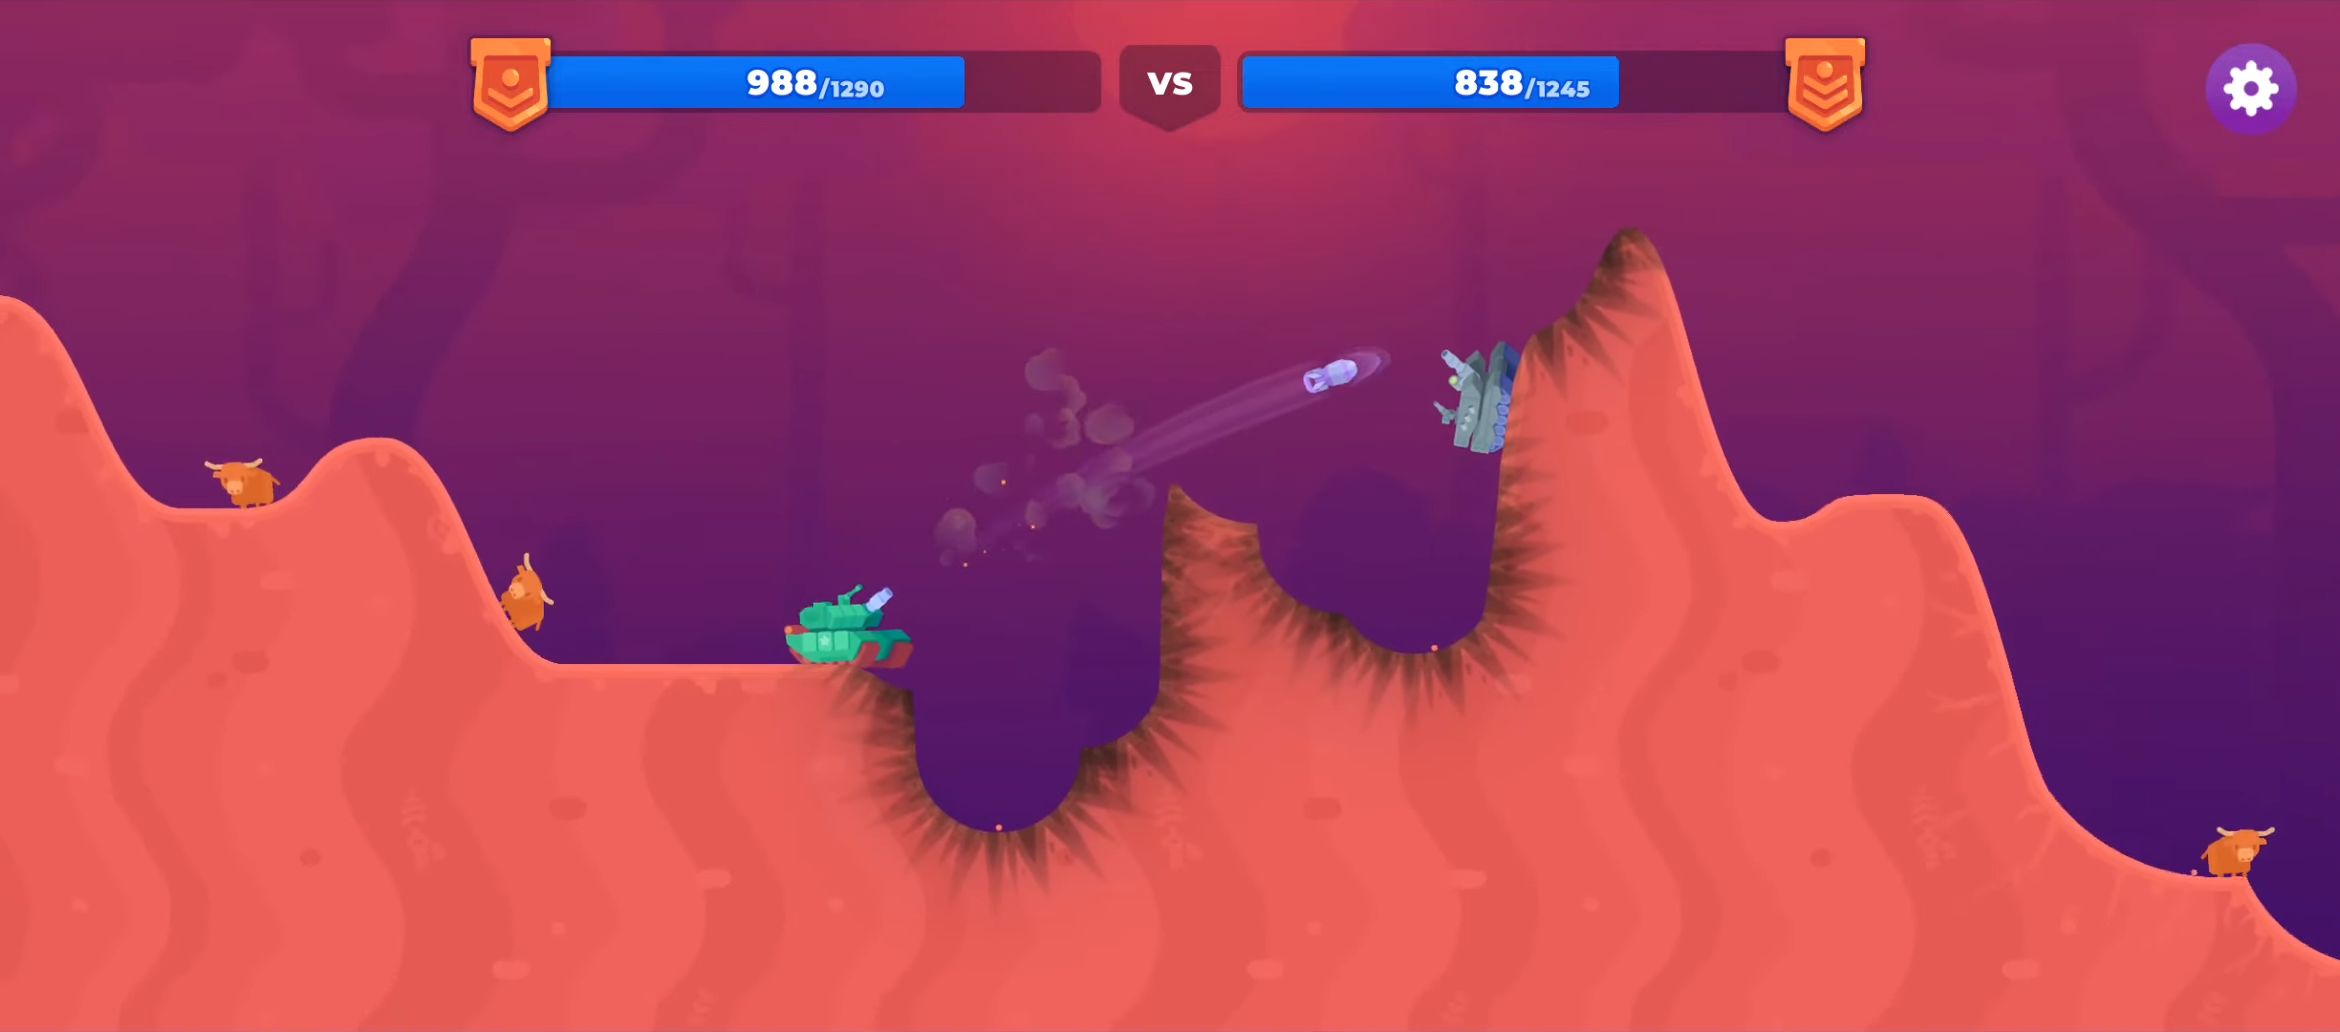 Gameplay of the Tank Stars 2 for Android phone or tablet.